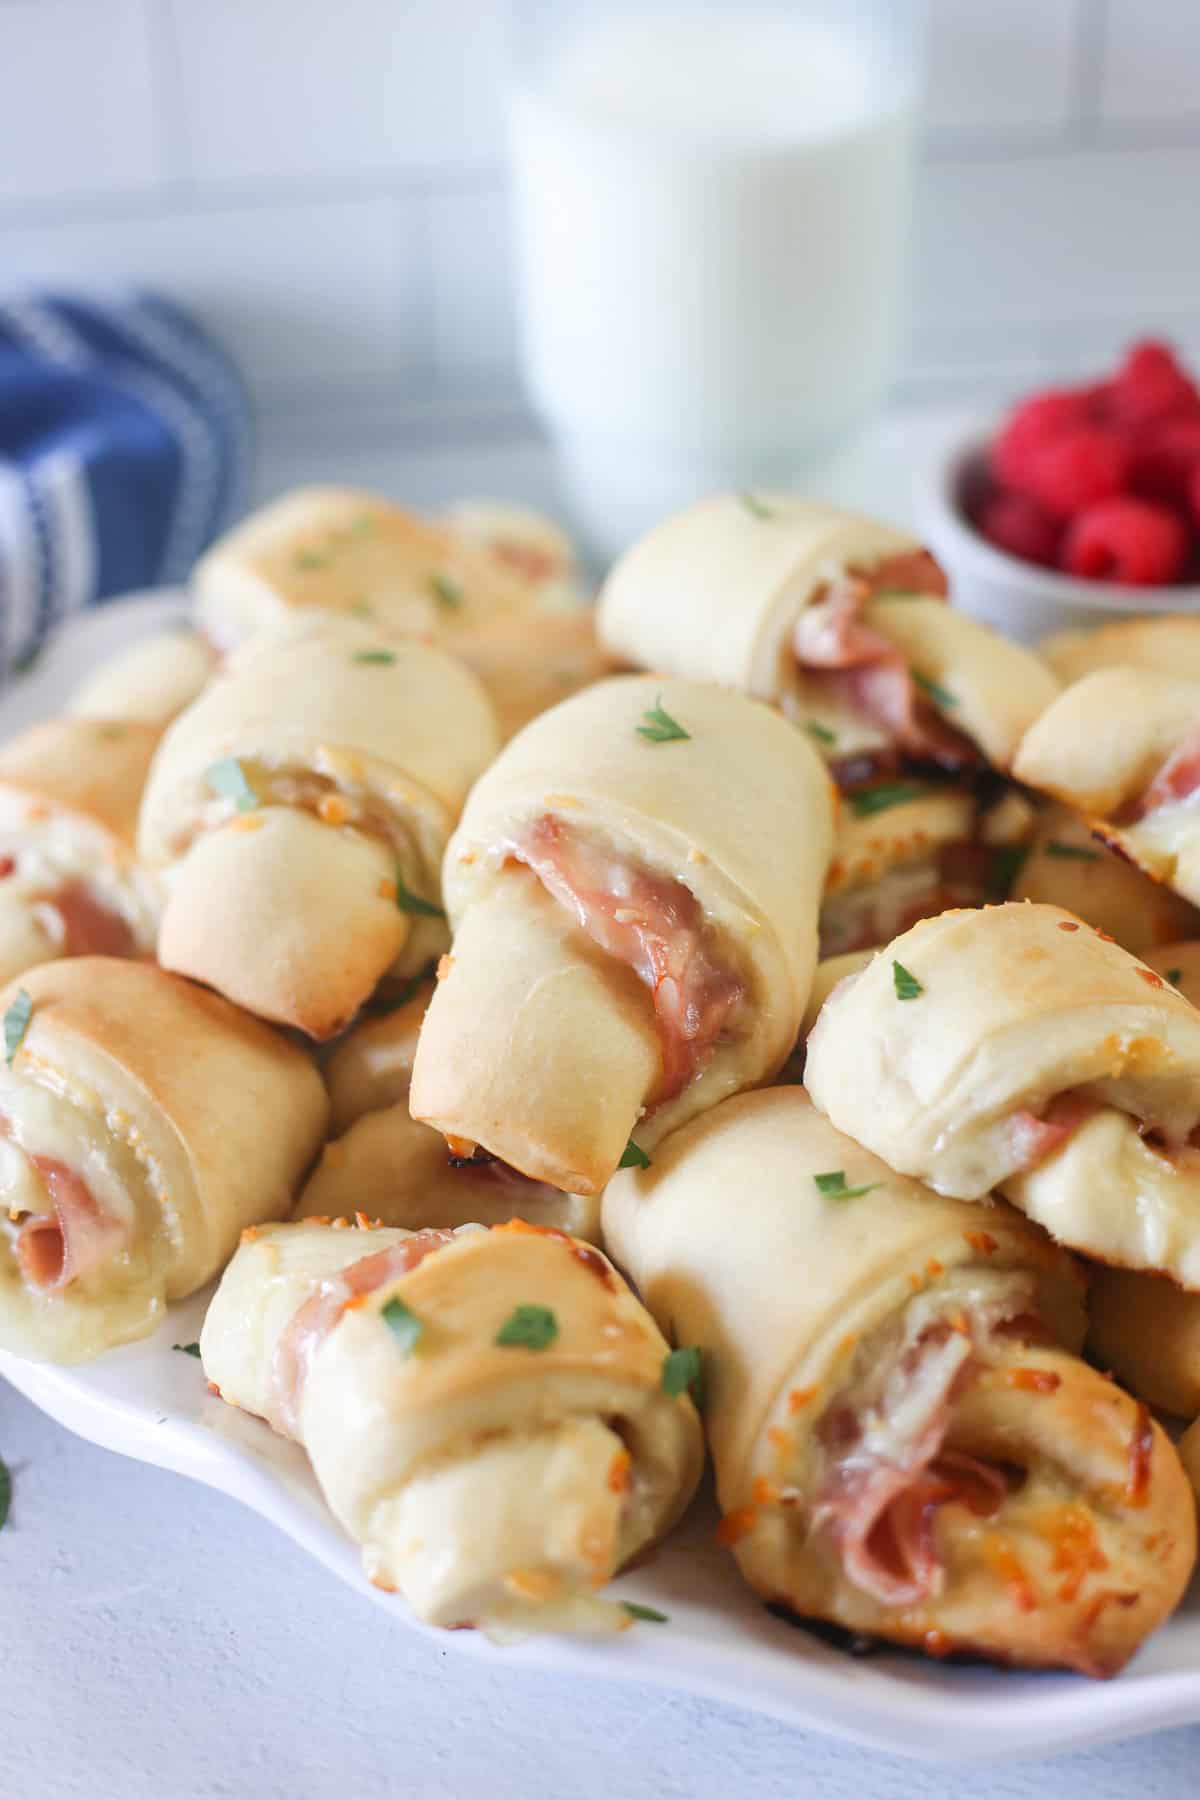 Ham and cheese crescent rolls piled up on a plate with raspberries in the background.